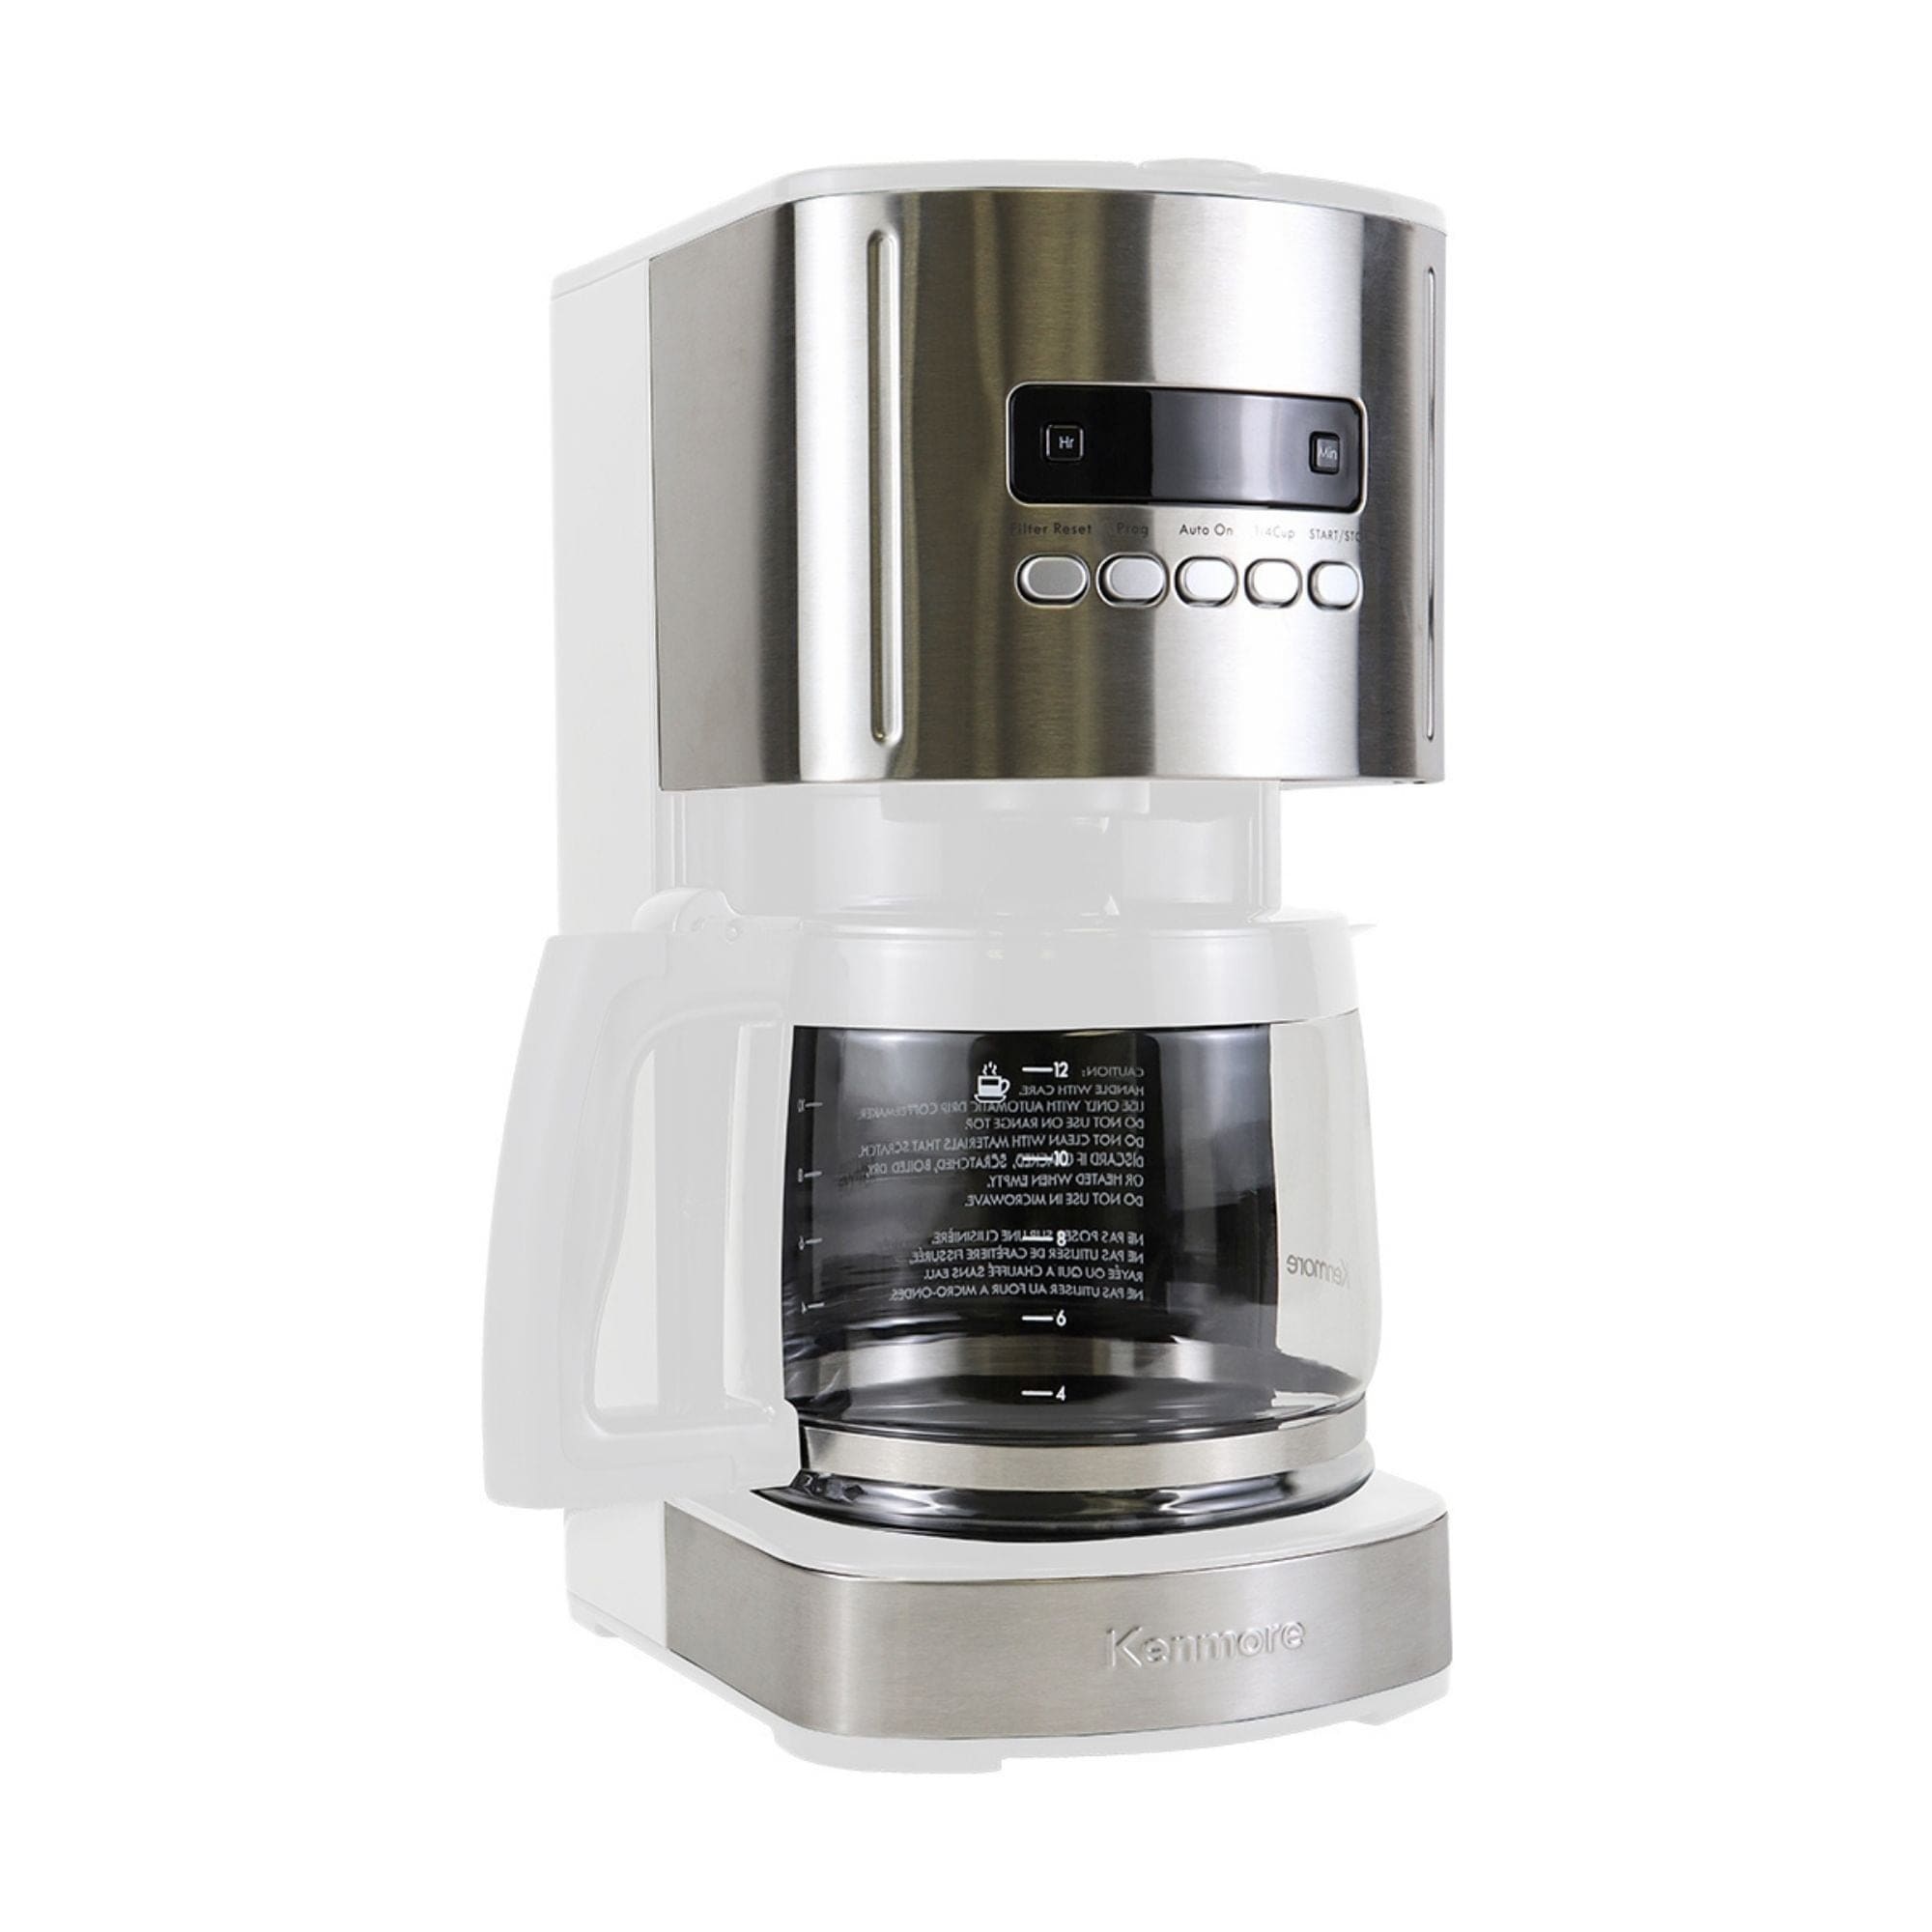 Kenmore Aroma Control Programmable 12-Cup Coffee Maker - Stainless Steel